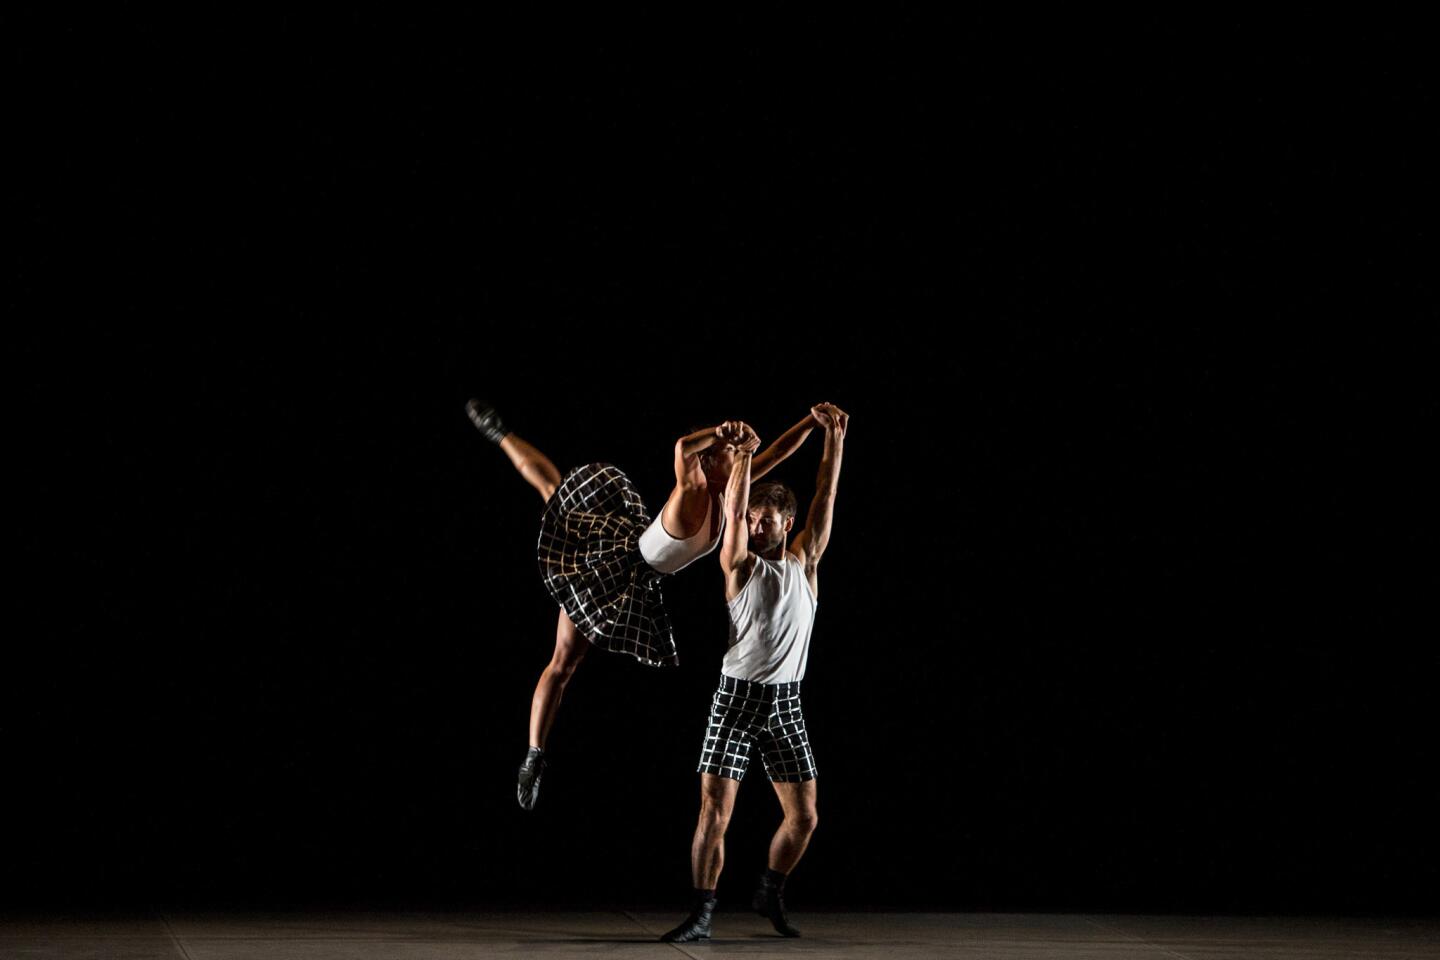 L.A. Dance Project performs 'Morgan's Last Chug' and 'Untitled'